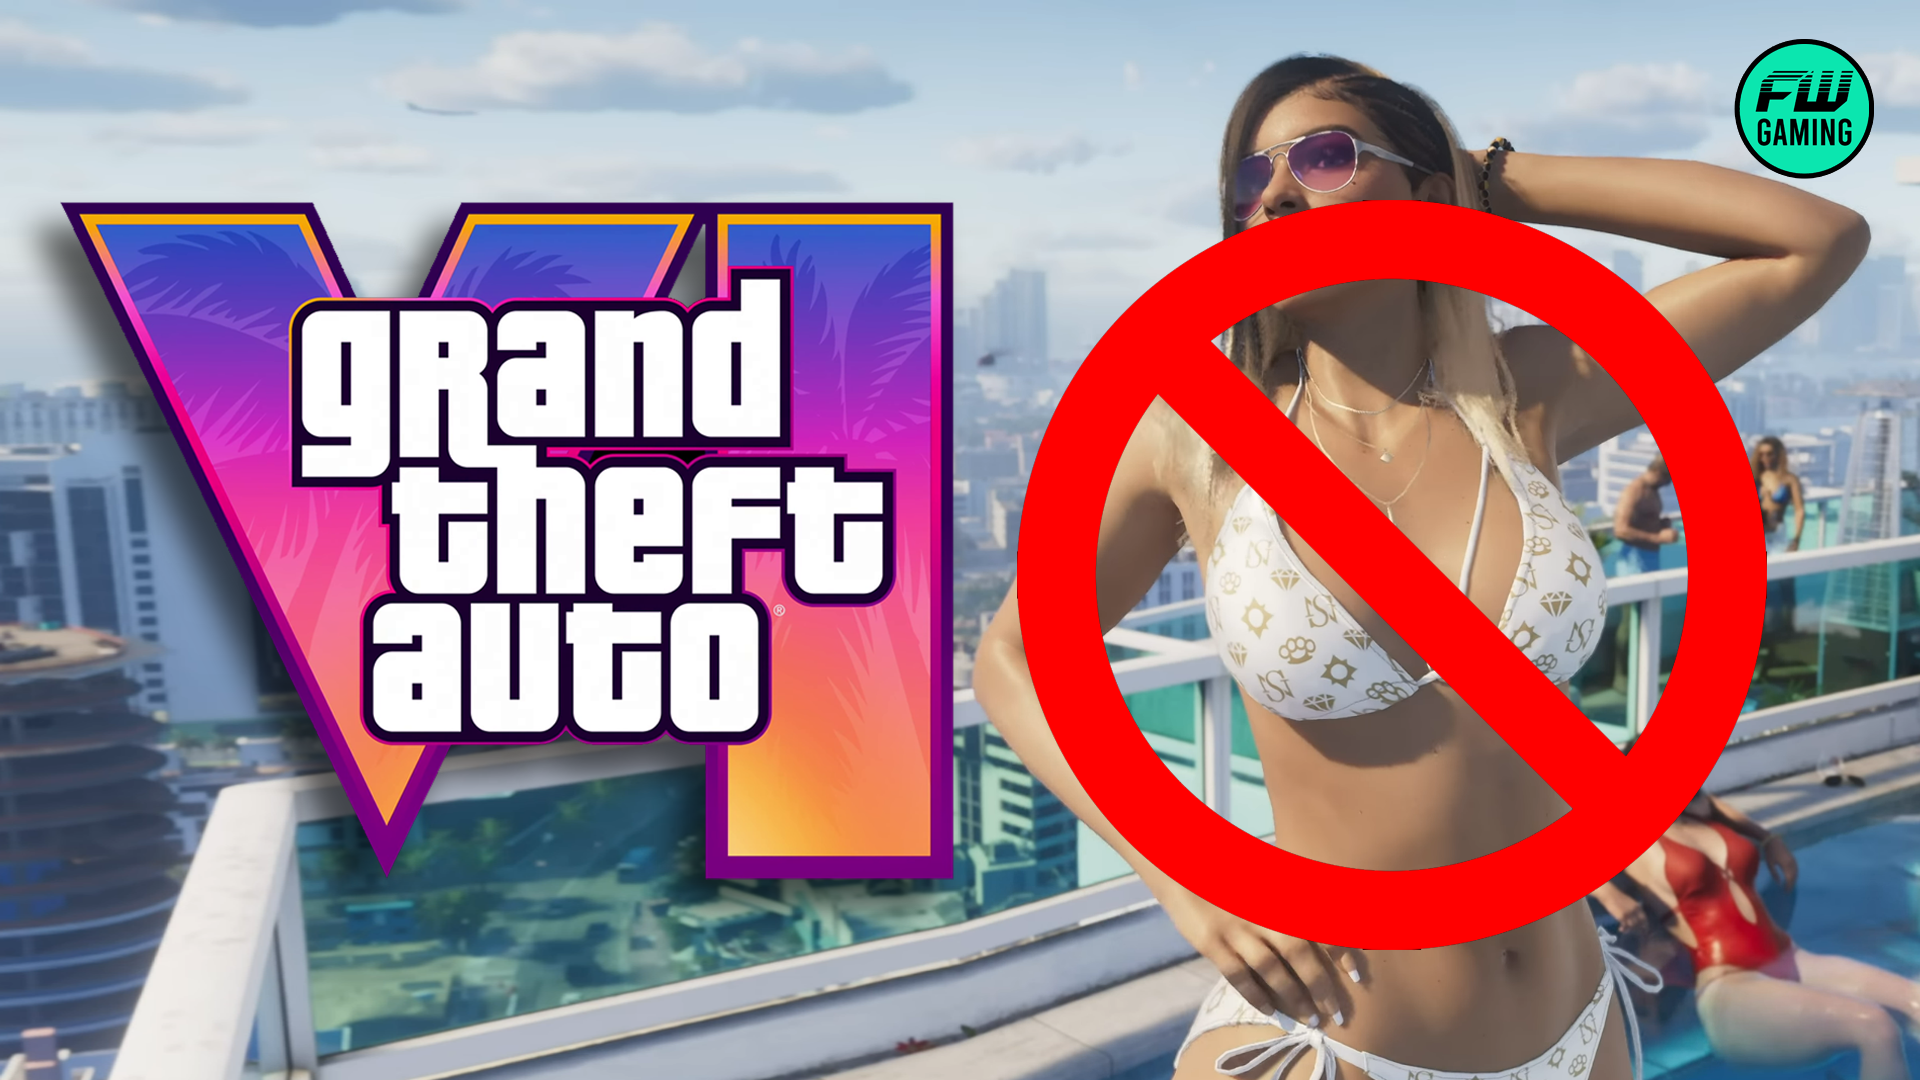 GTA 6 Lives Up To Typical Rockstar Games Controversy as People Call for the Game to Be Banned